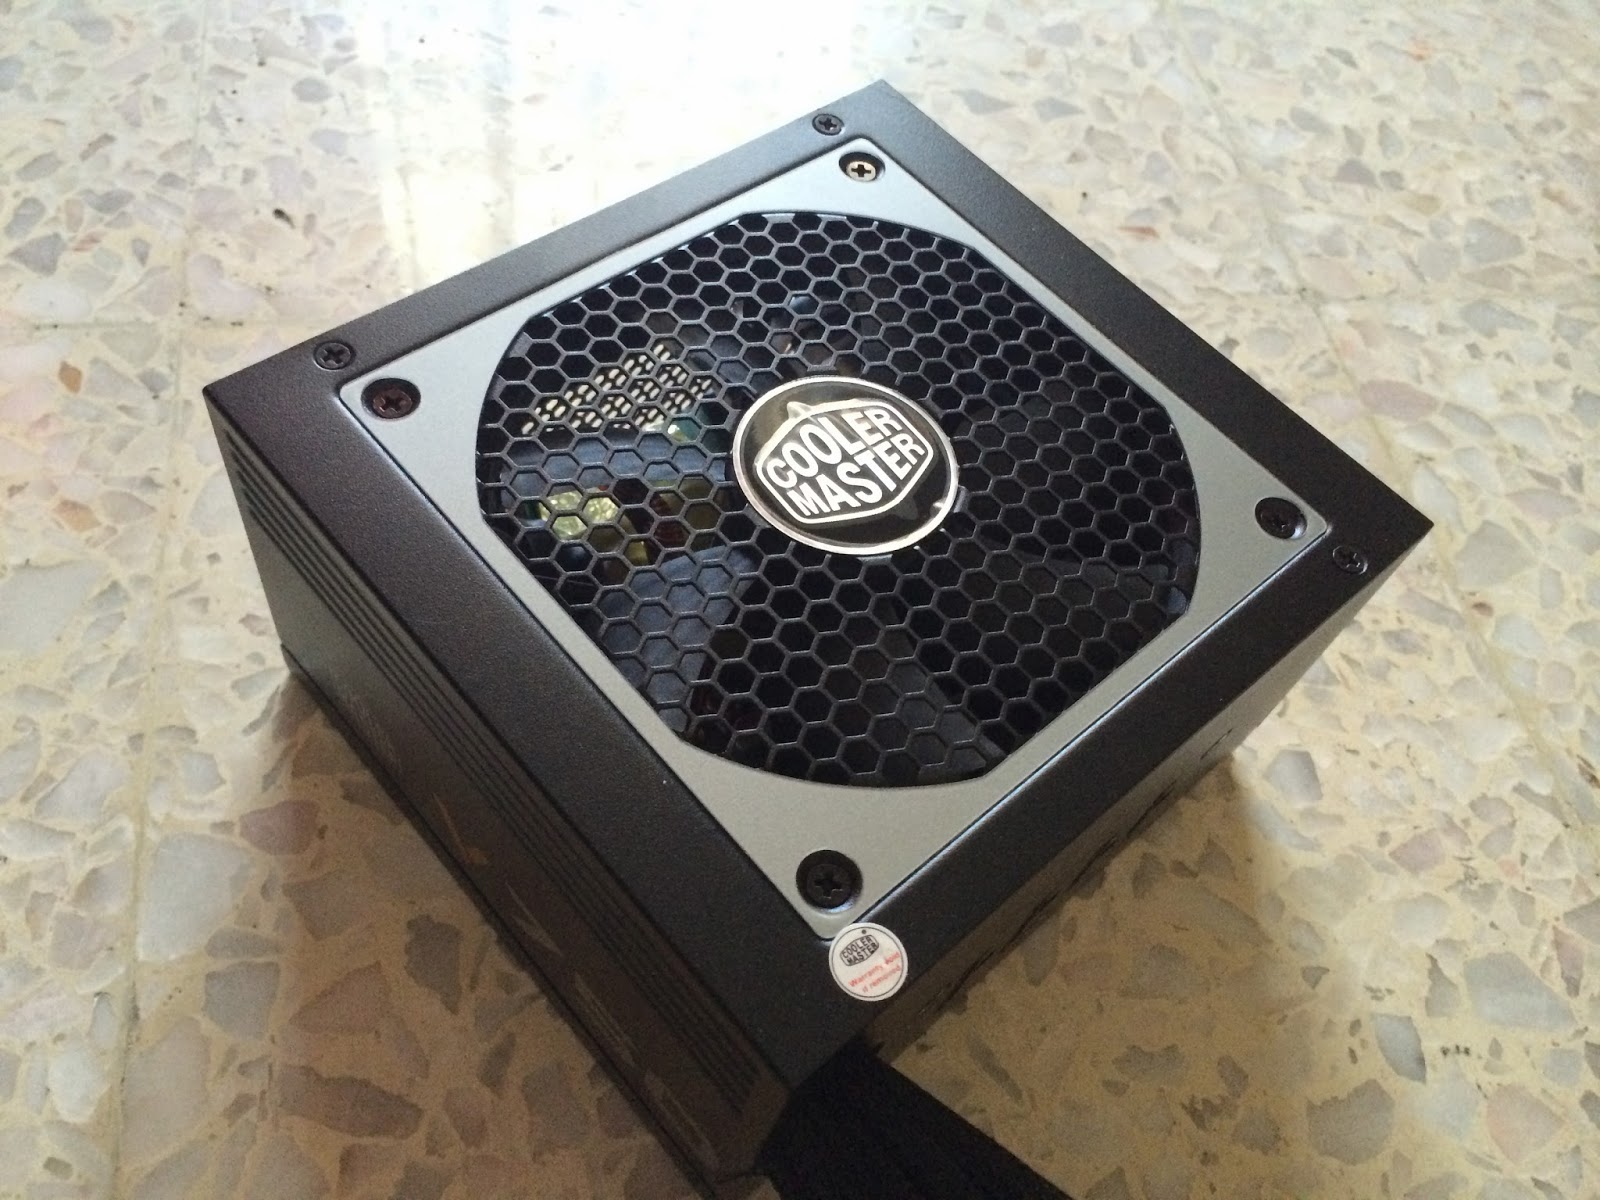 Cooler Master V750S Power Supply Unboxing & Overview 23